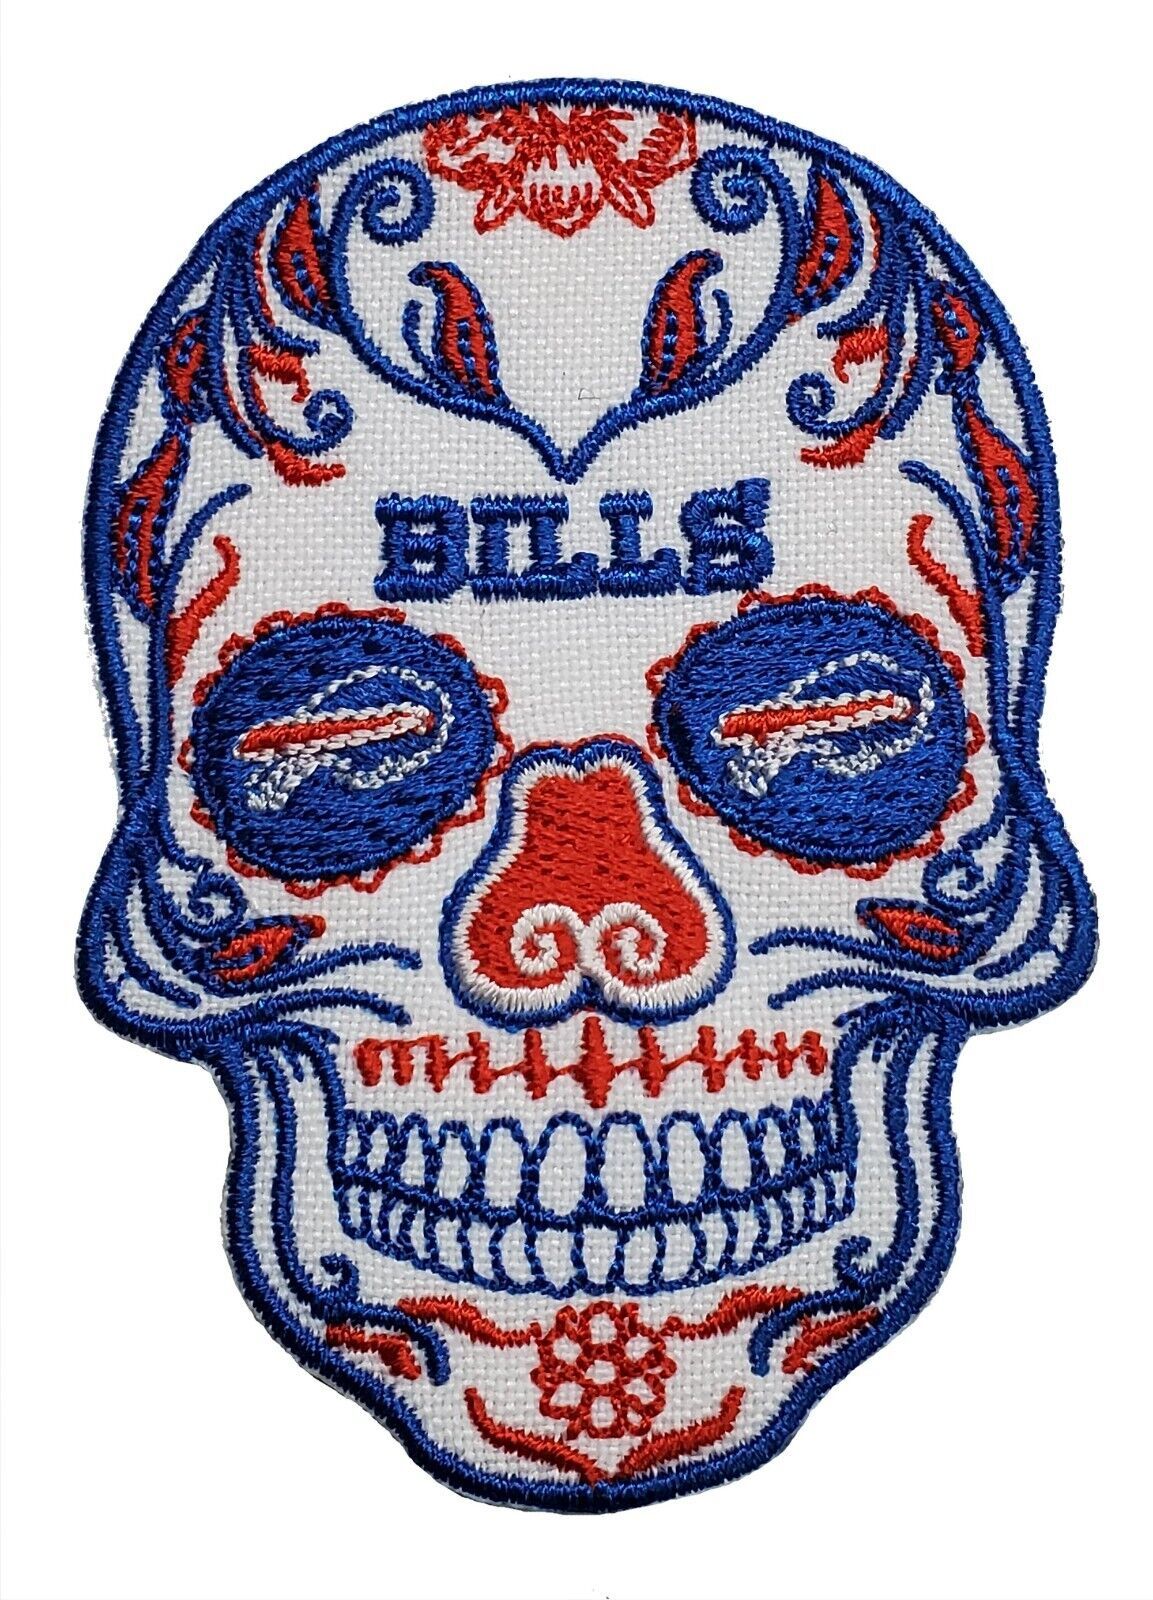 Primary image for Buffalo Bills Sugar Skull NFL Football Embroidered Iron On Patch Josh Allan